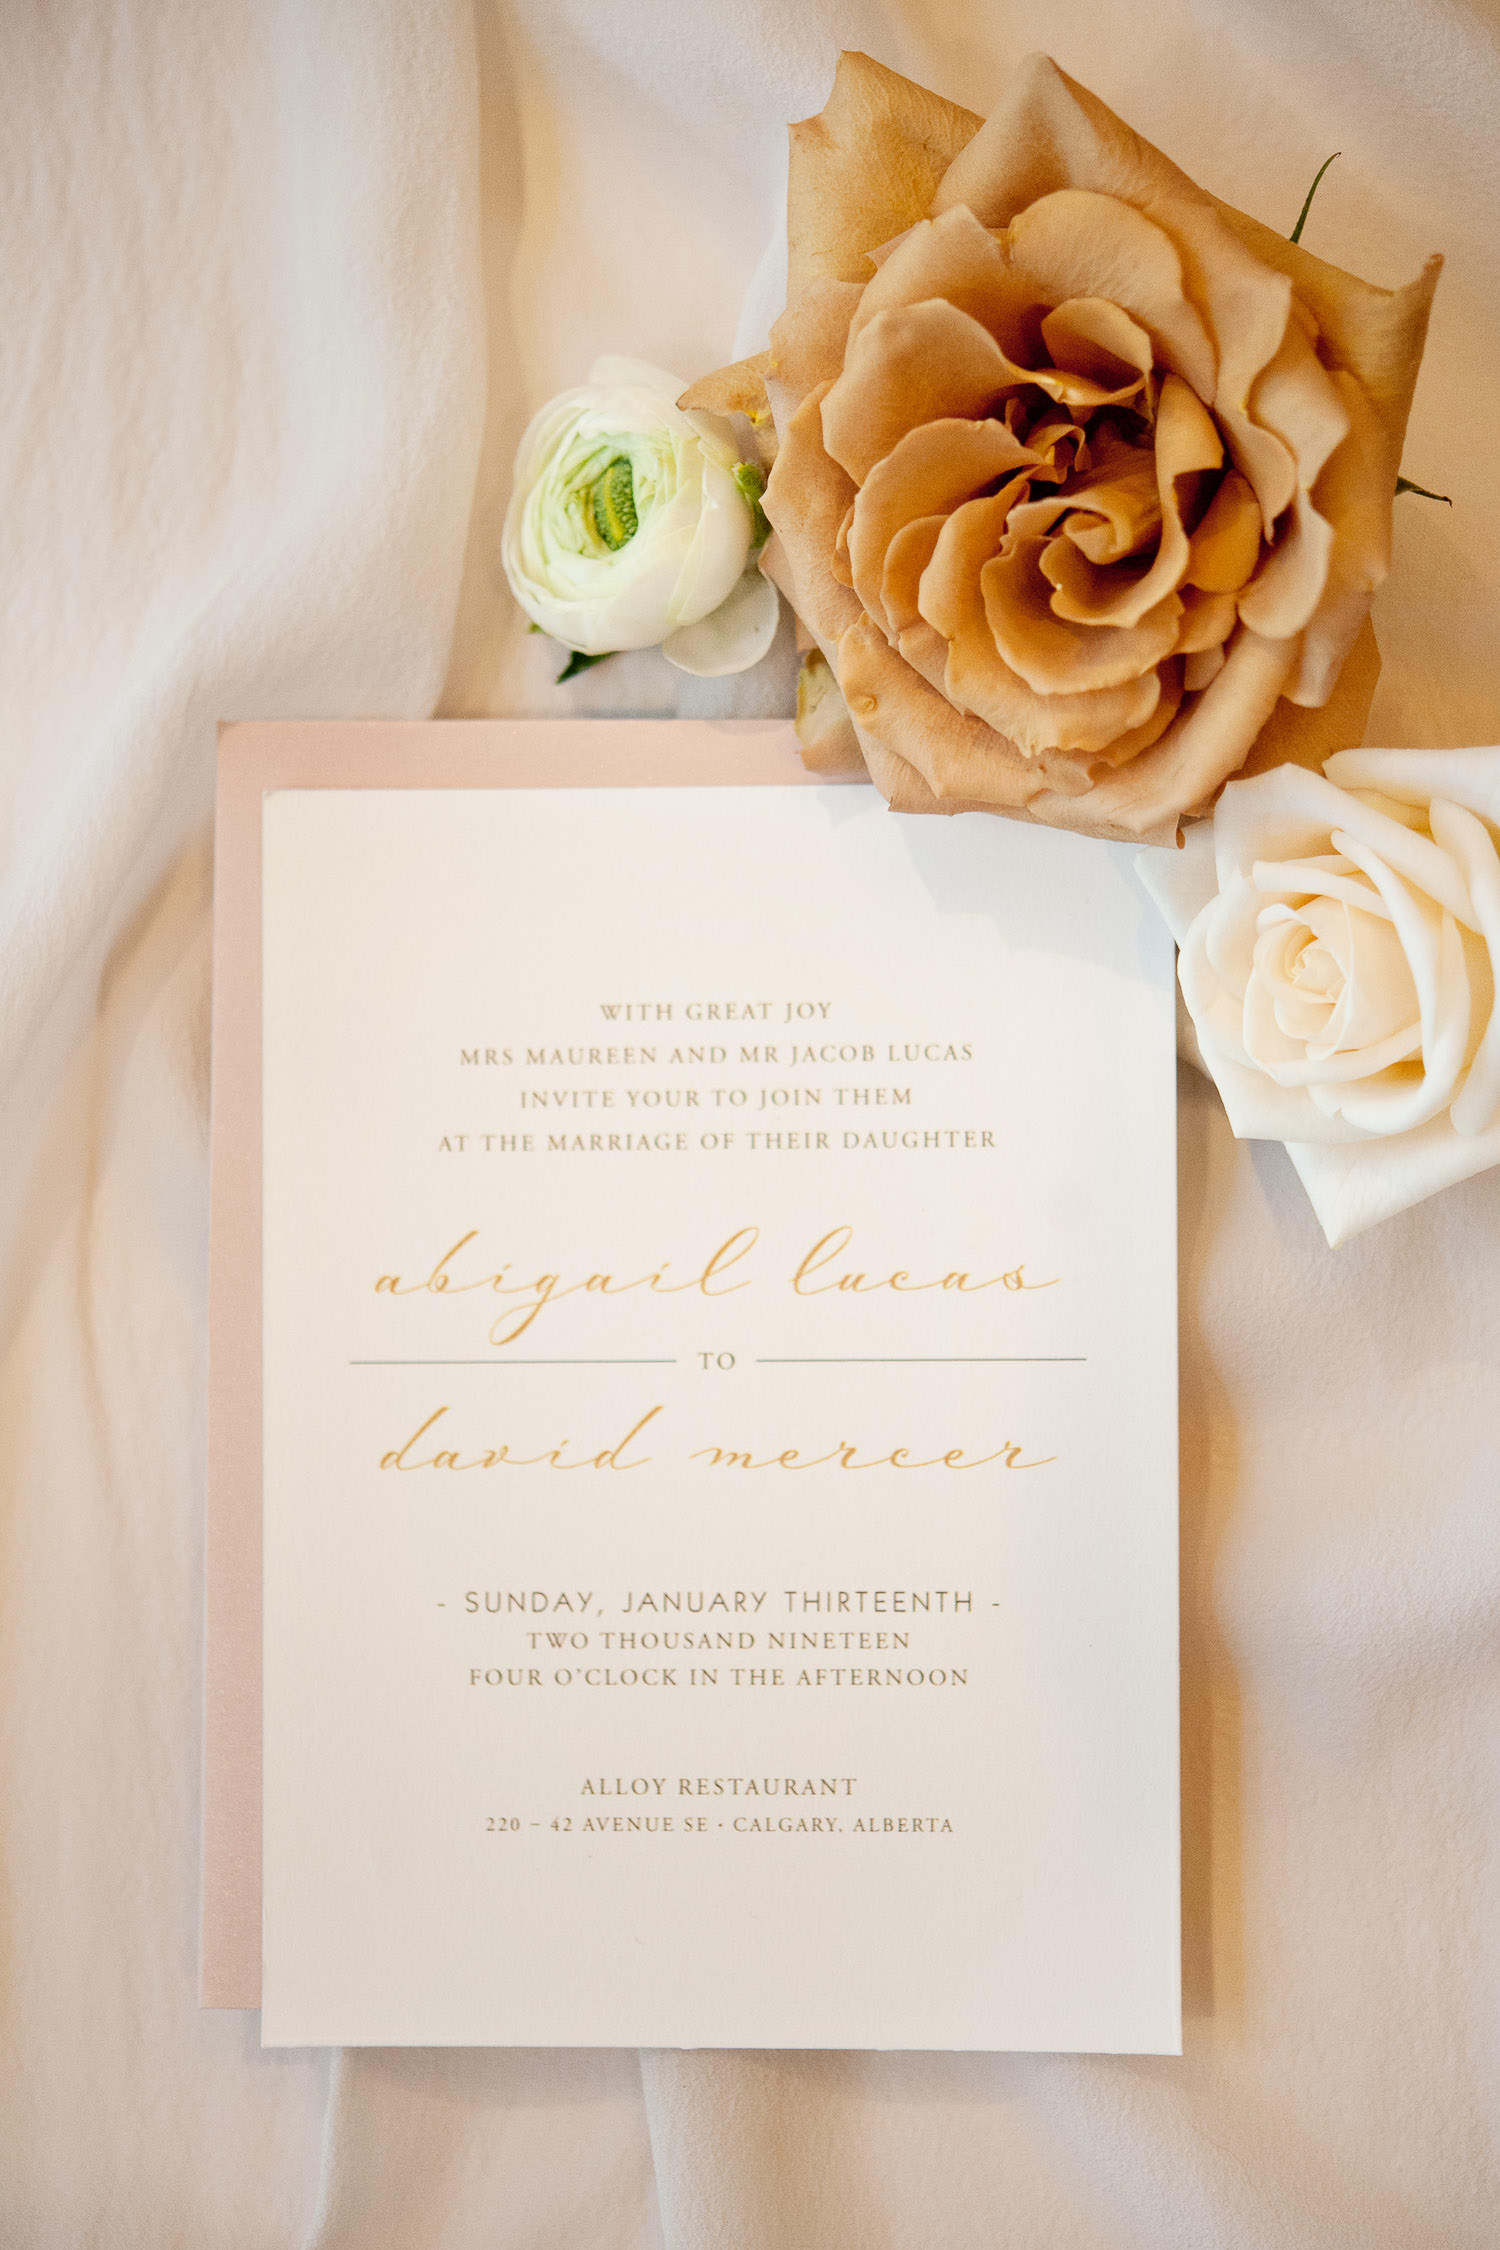 wedding invitation styled with roses captured by Tara Whittaker Photography